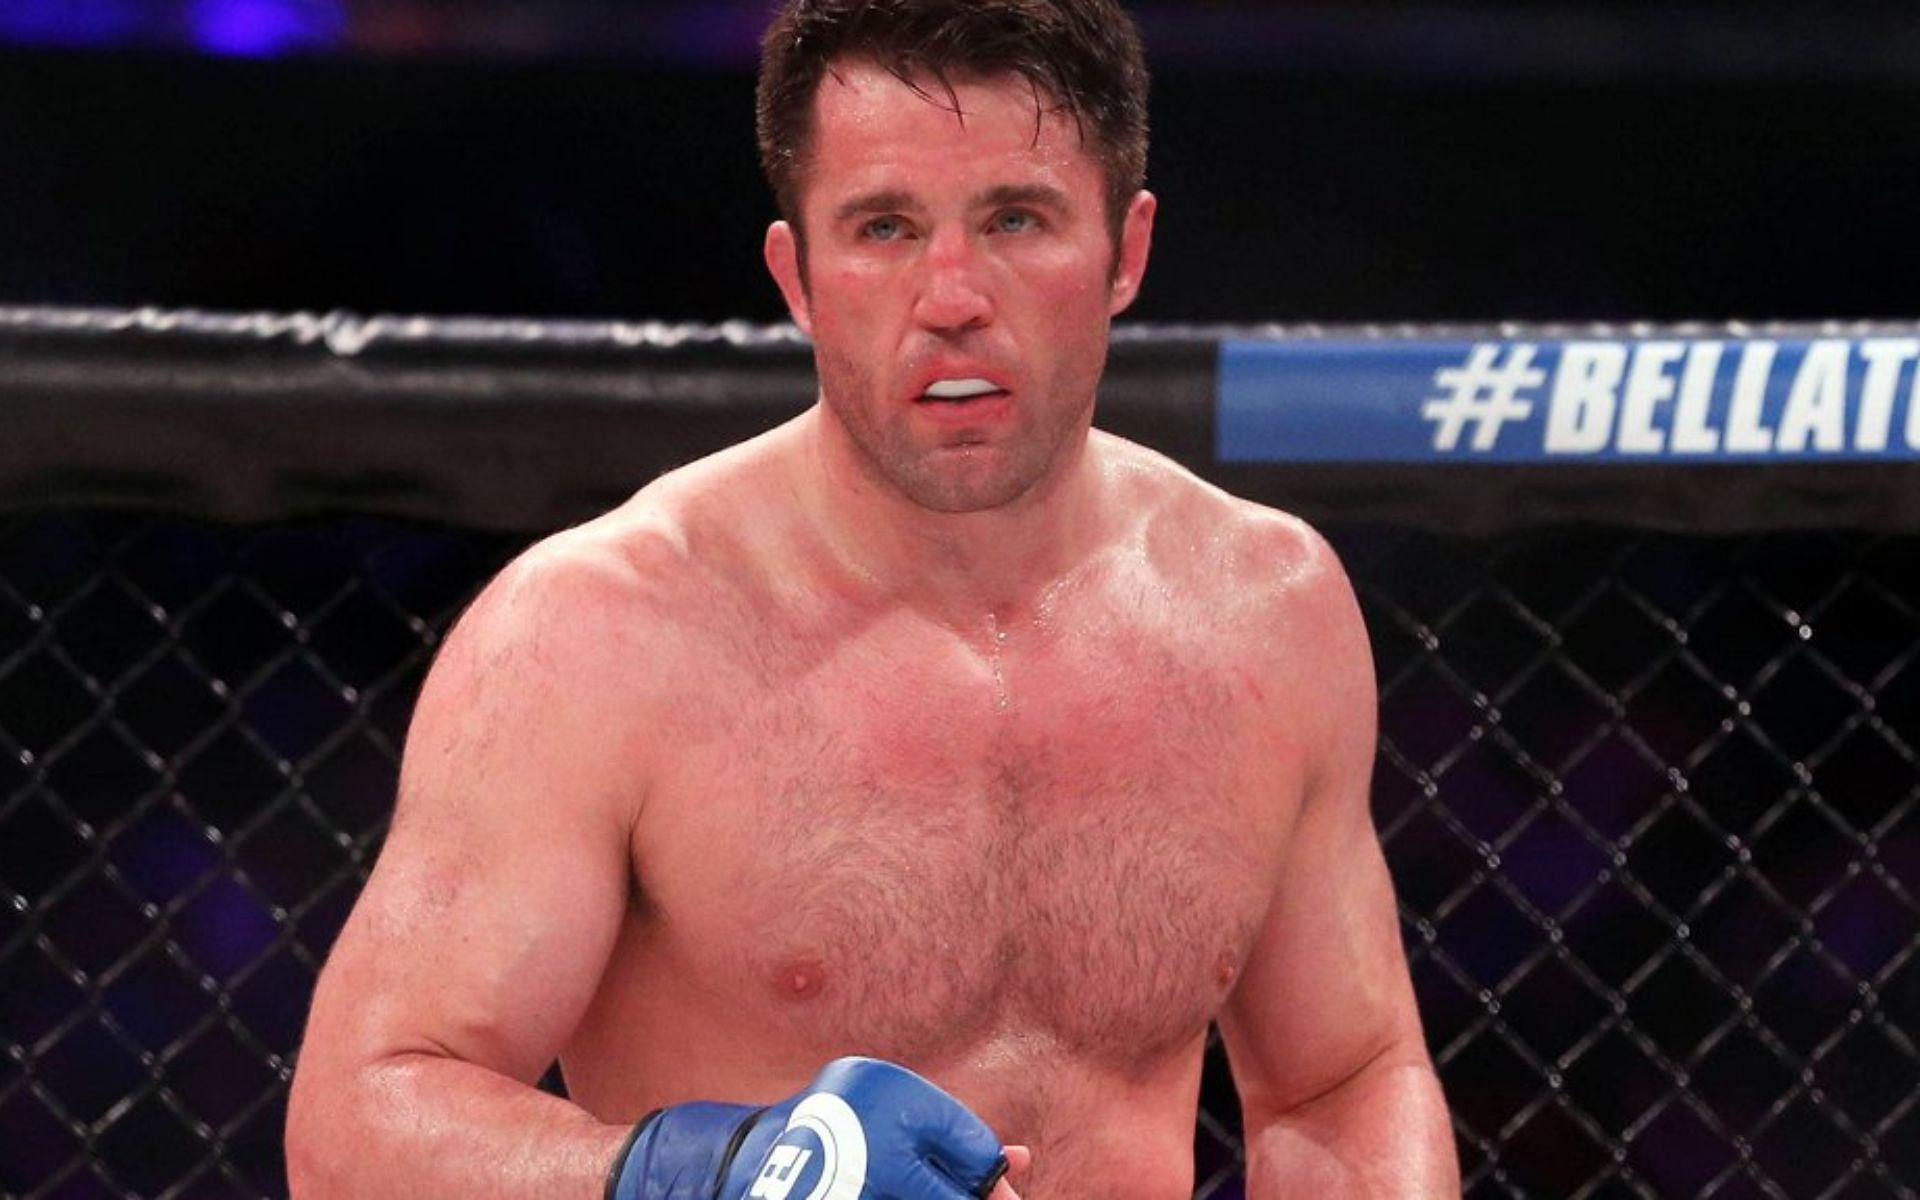 Chael Sonnen [Images courtesy of @MMAJunkie on Twitter]